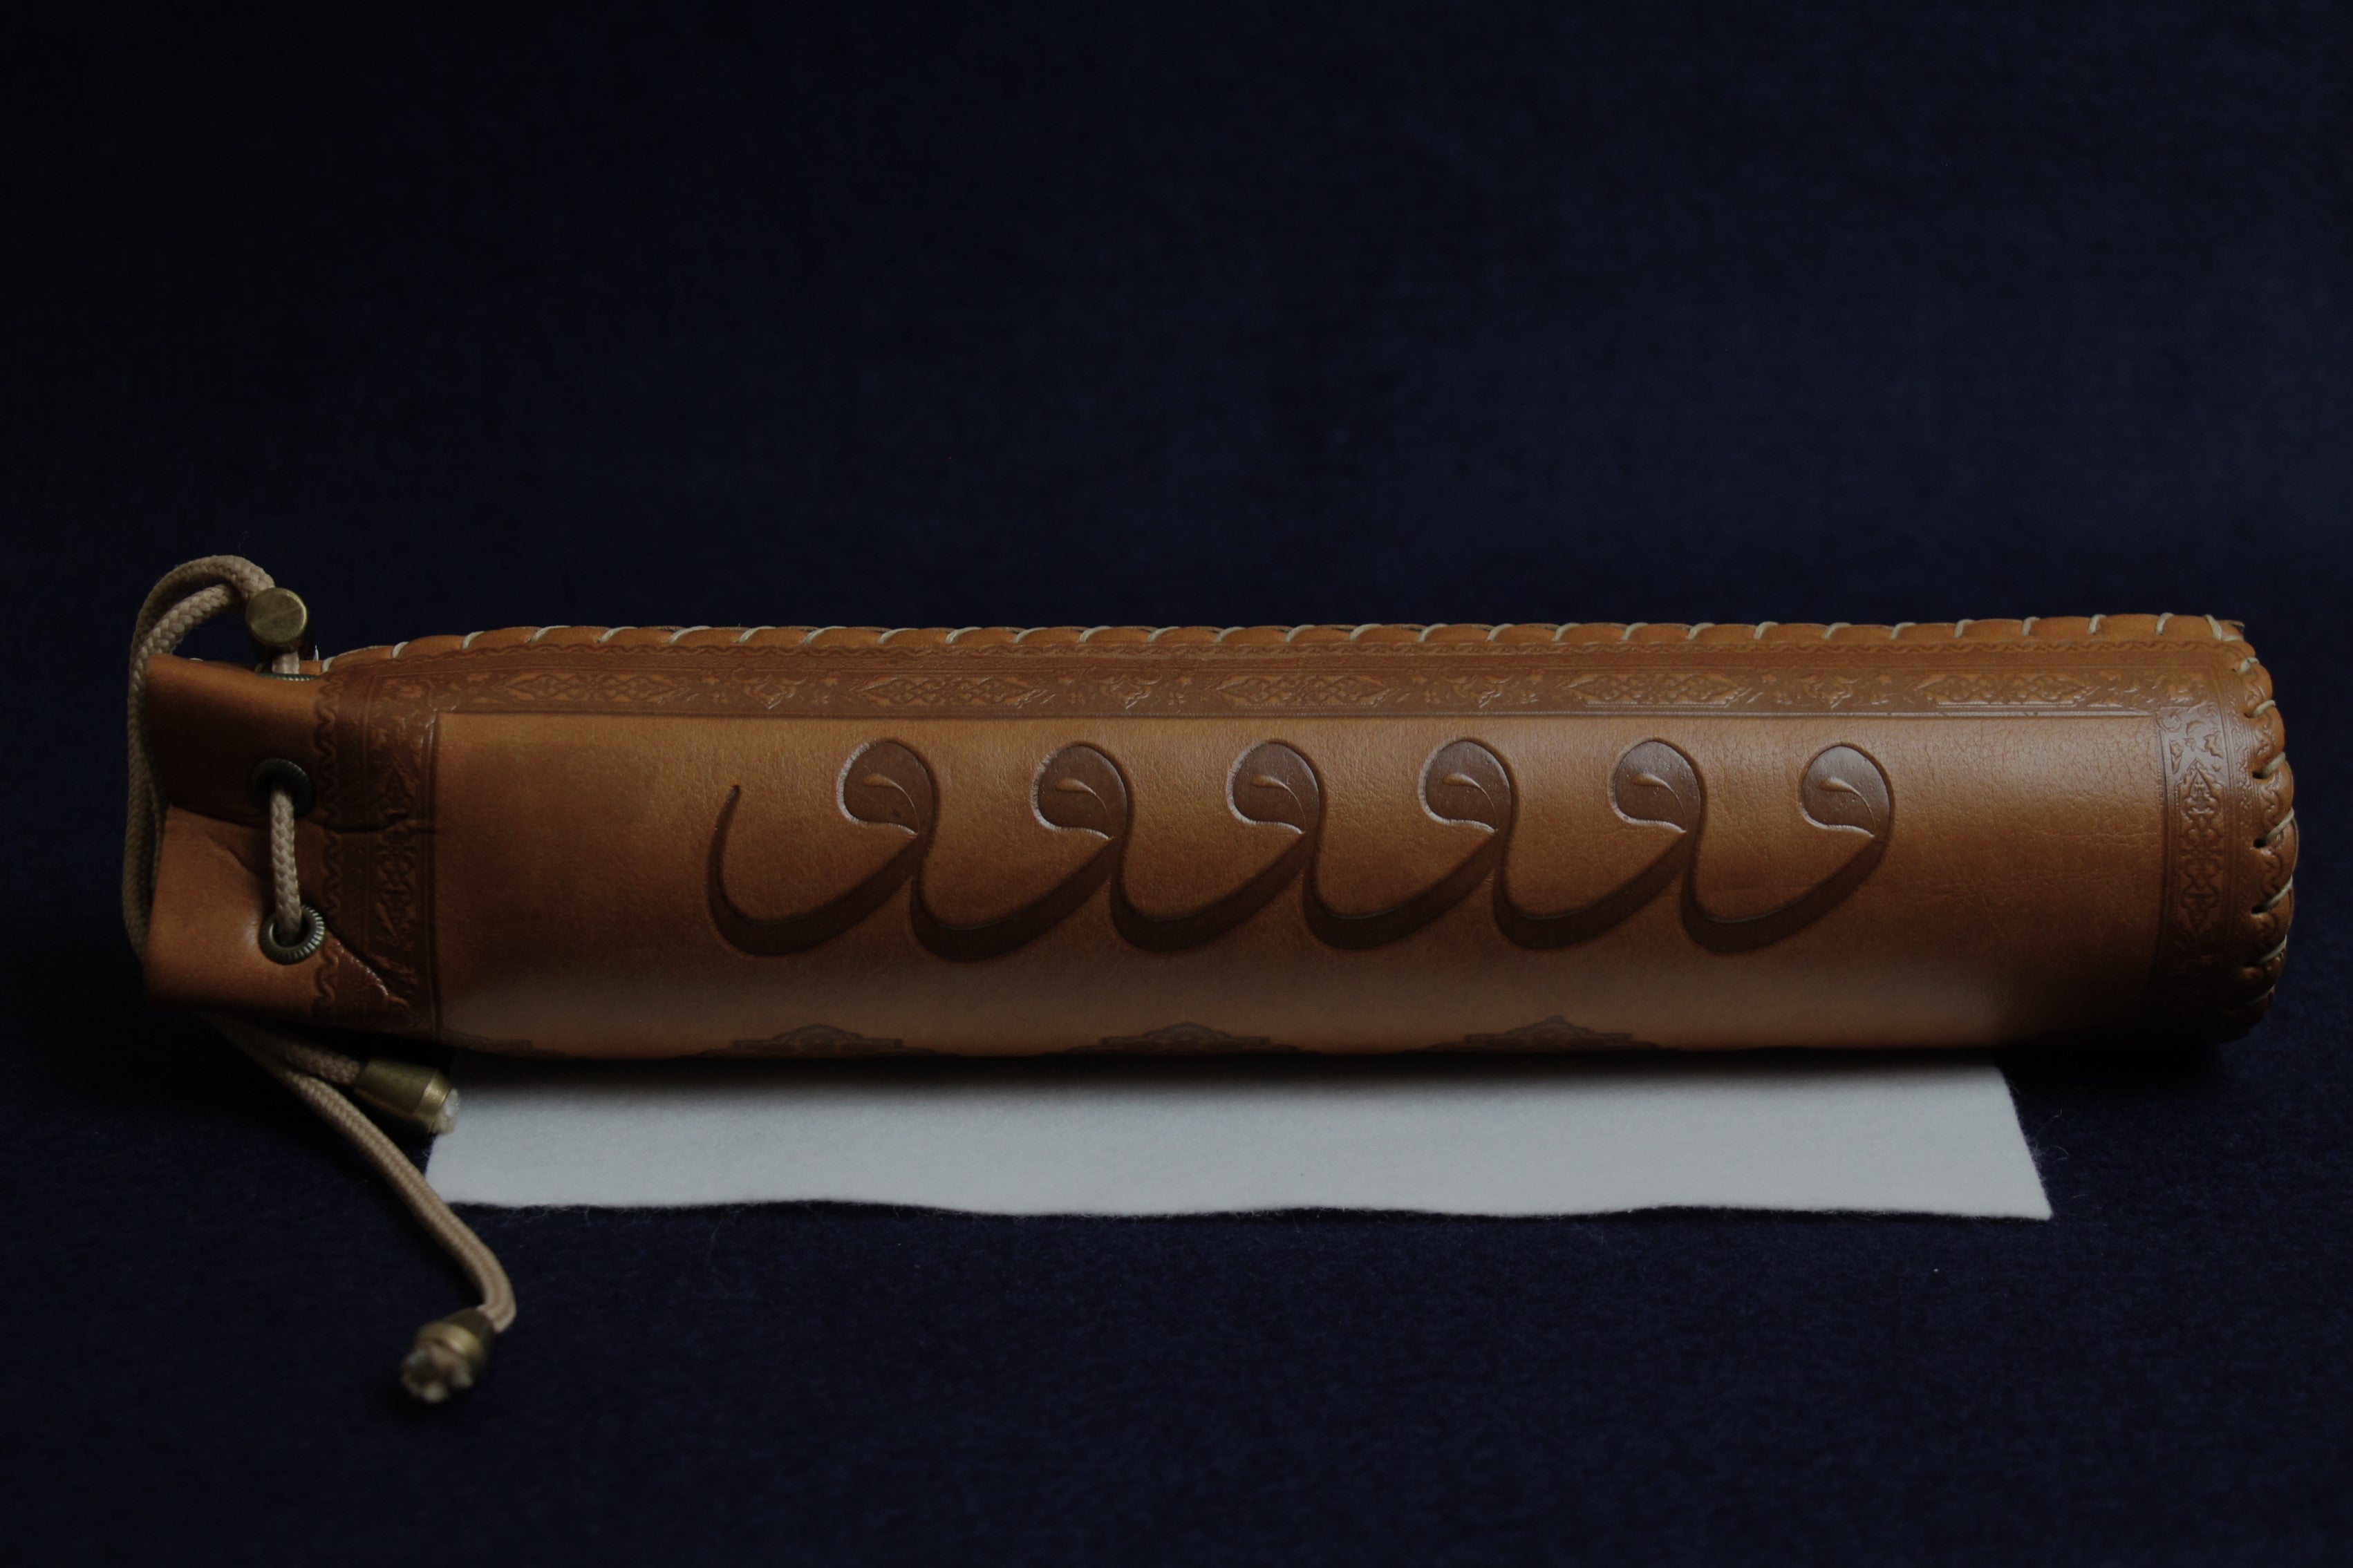 Round tube qalam case made of faux leather - medium brown